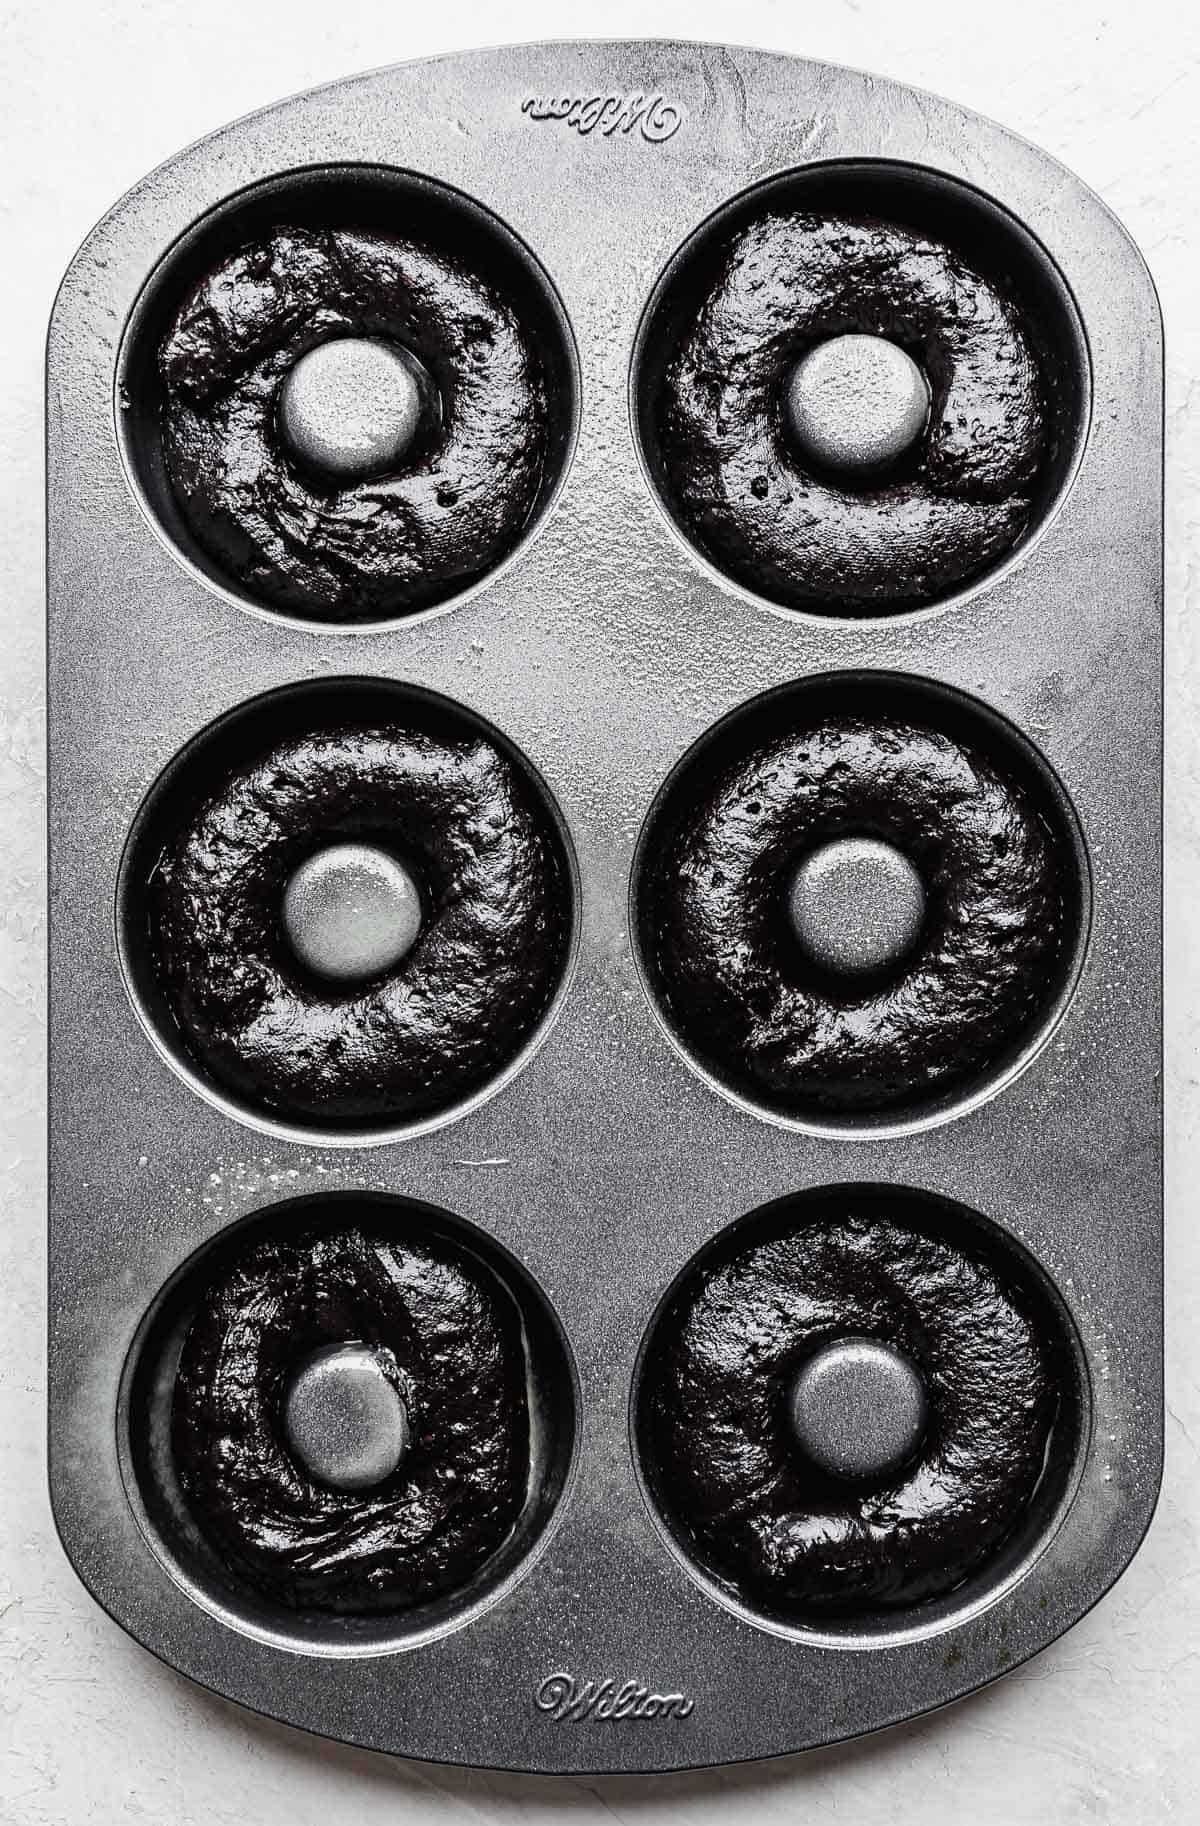 Oreo Donut batter in a six cavity donut pan on a white background.